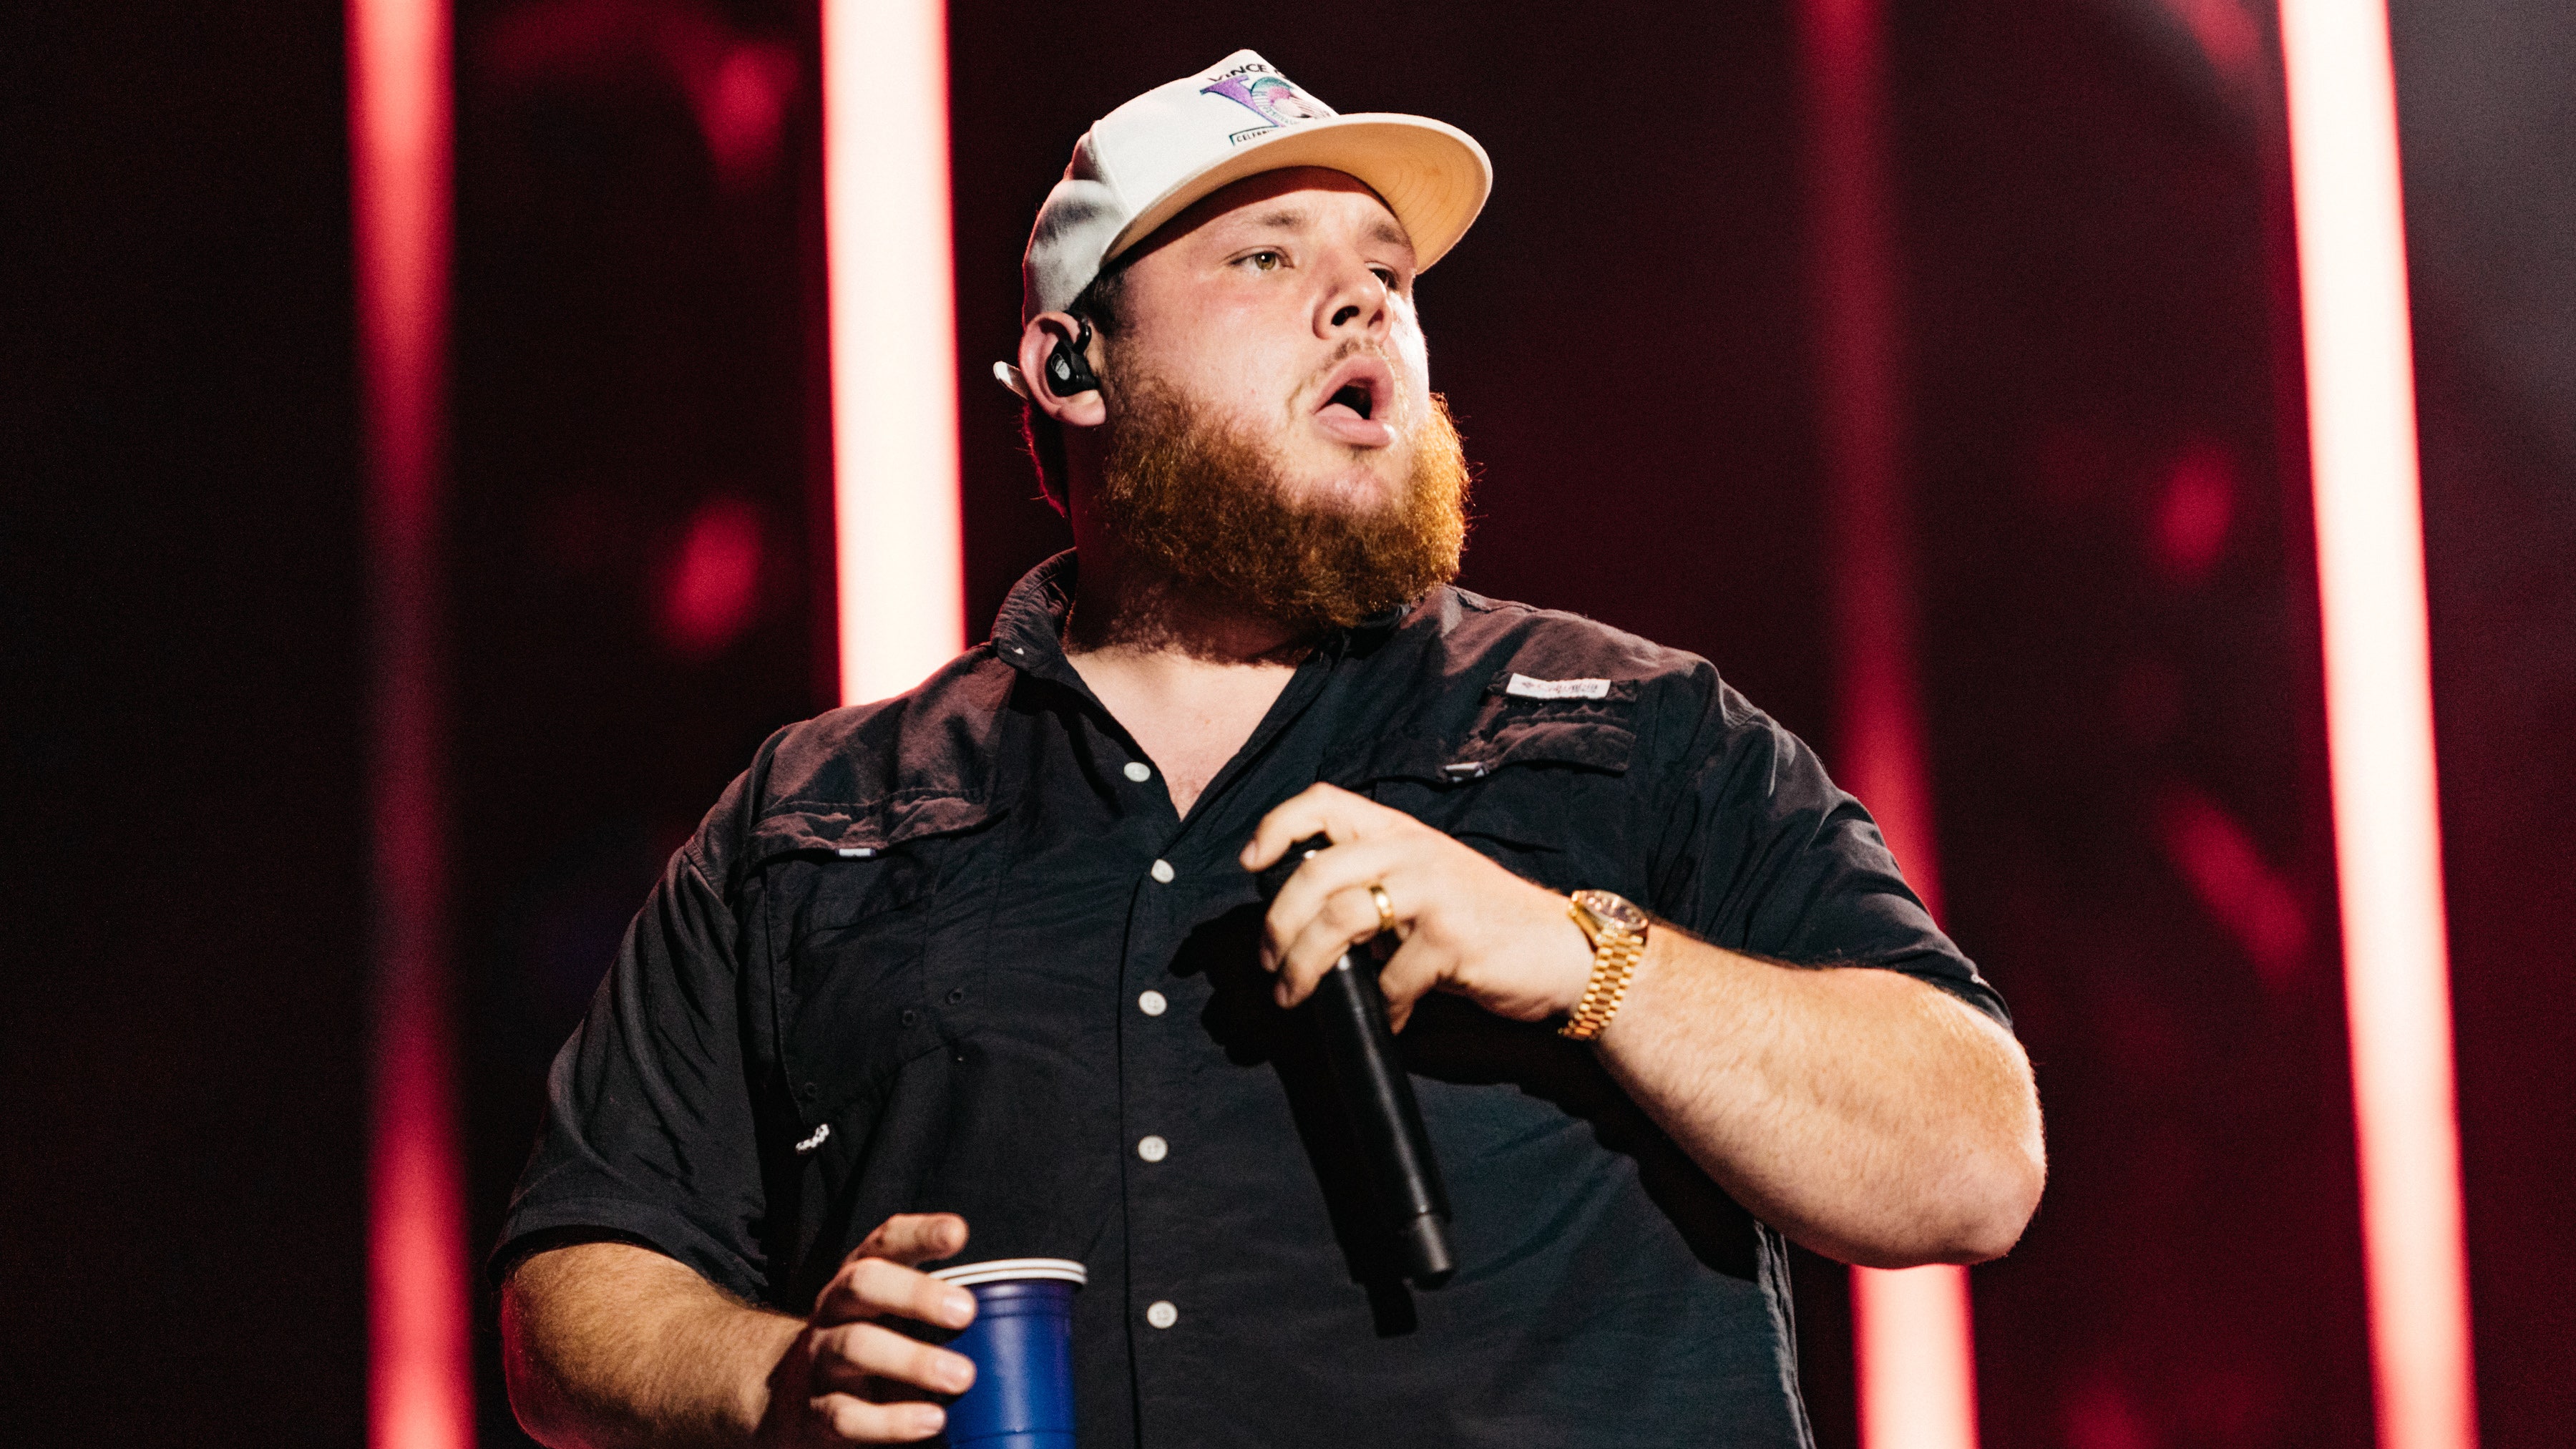 Luke Combs in a black shirt and light baseball cap holding a microphone and blue solo cup